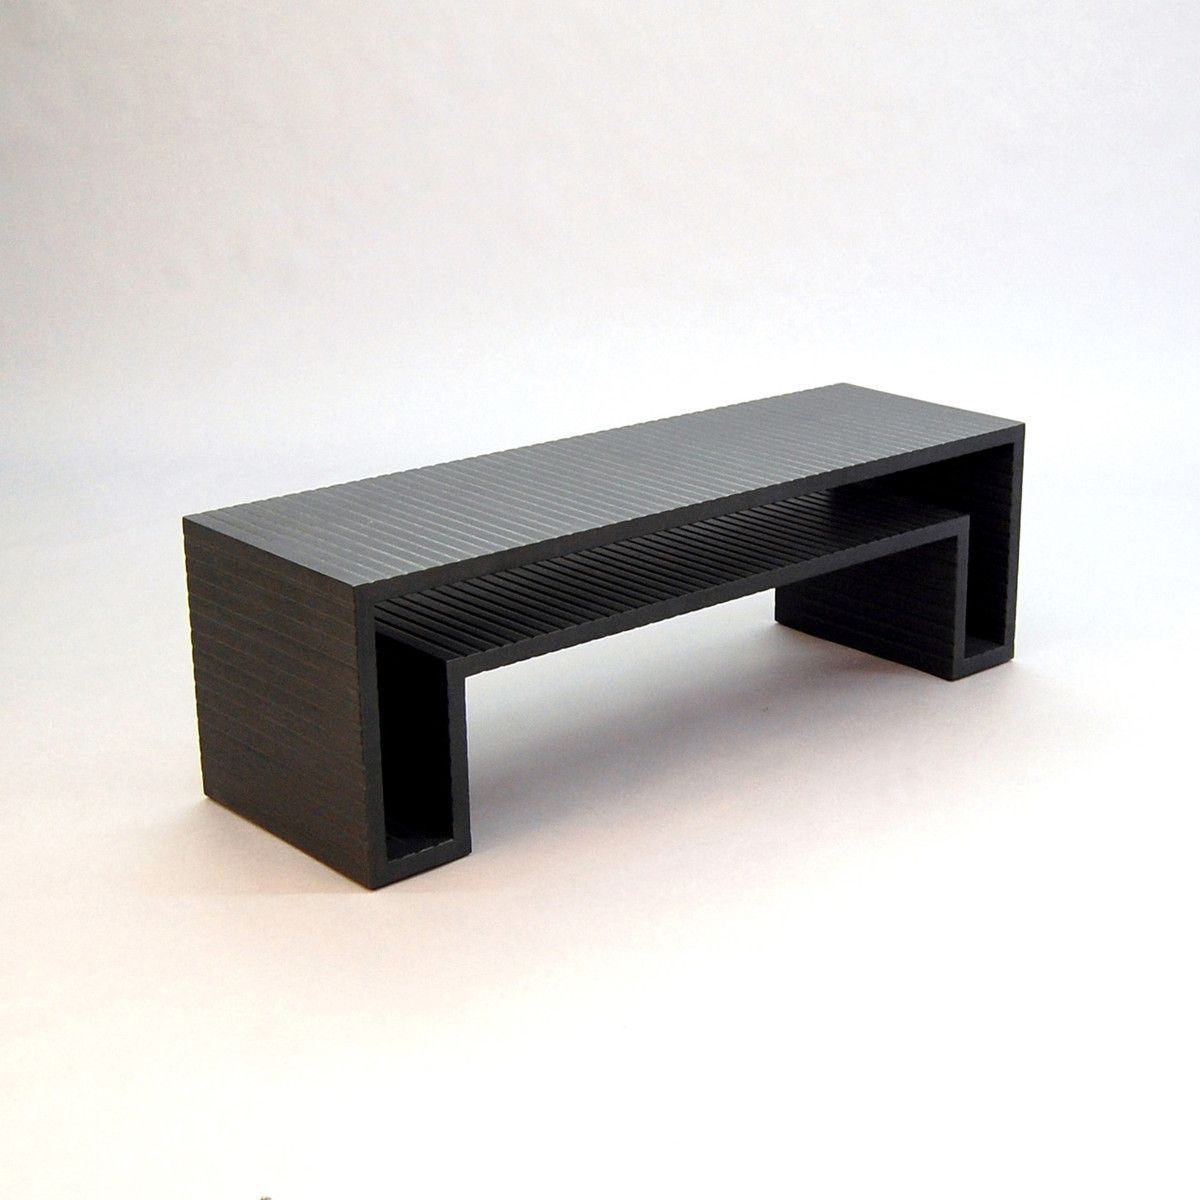 Openform Coffee Table | Geometric Furniture, L Shaped Pertaining To L Shaped Coffee Tables (View 11 of 15)